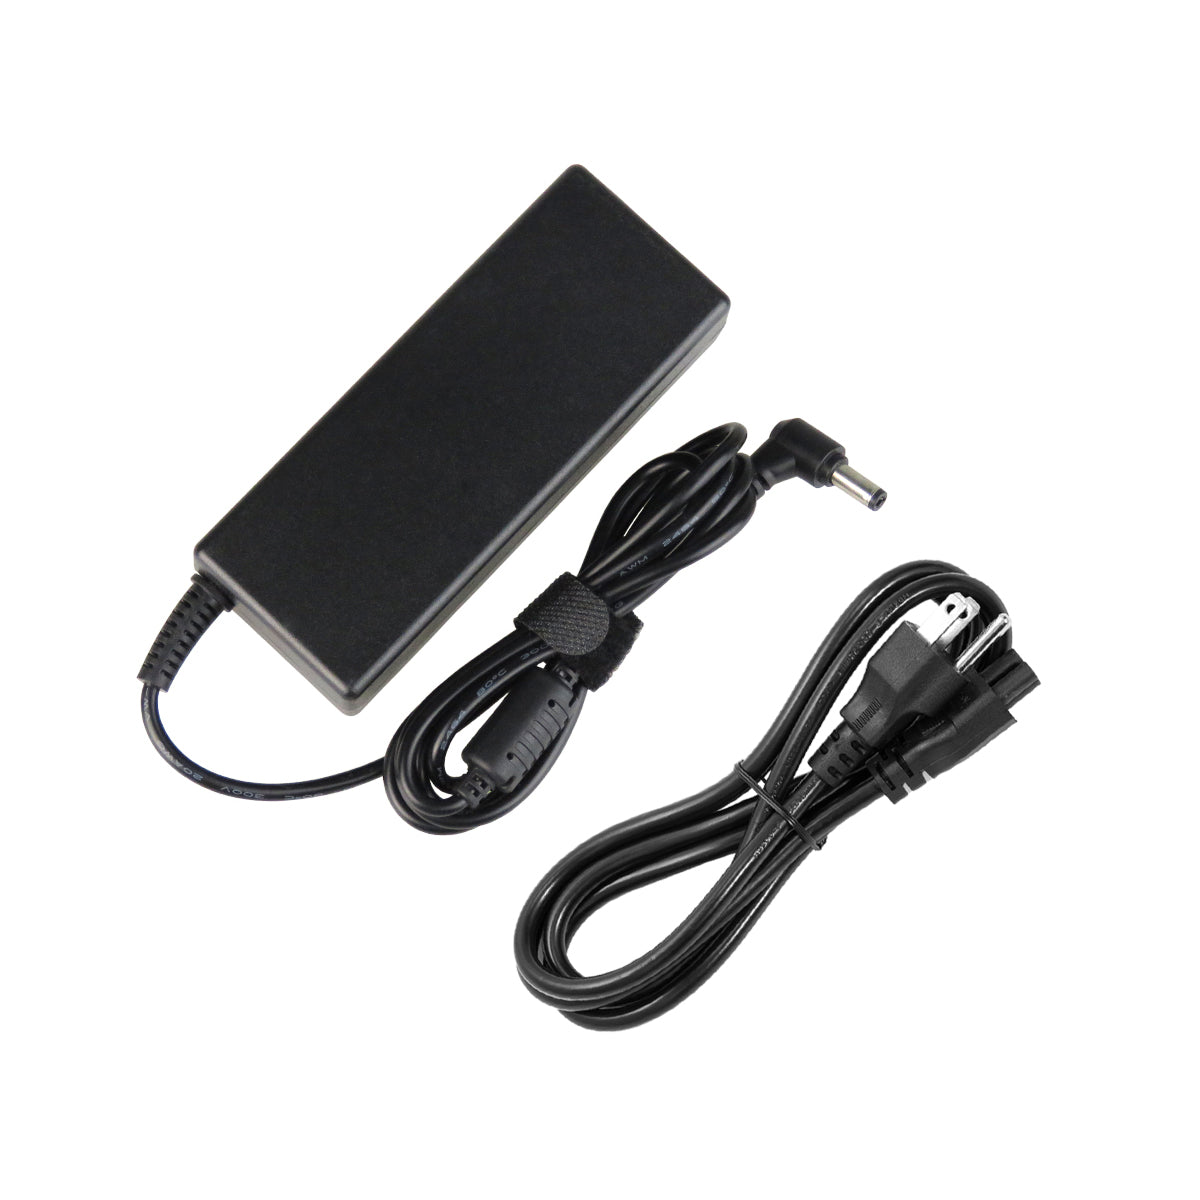 AC Adapter Charger for ASUS N81Vf Notebook.